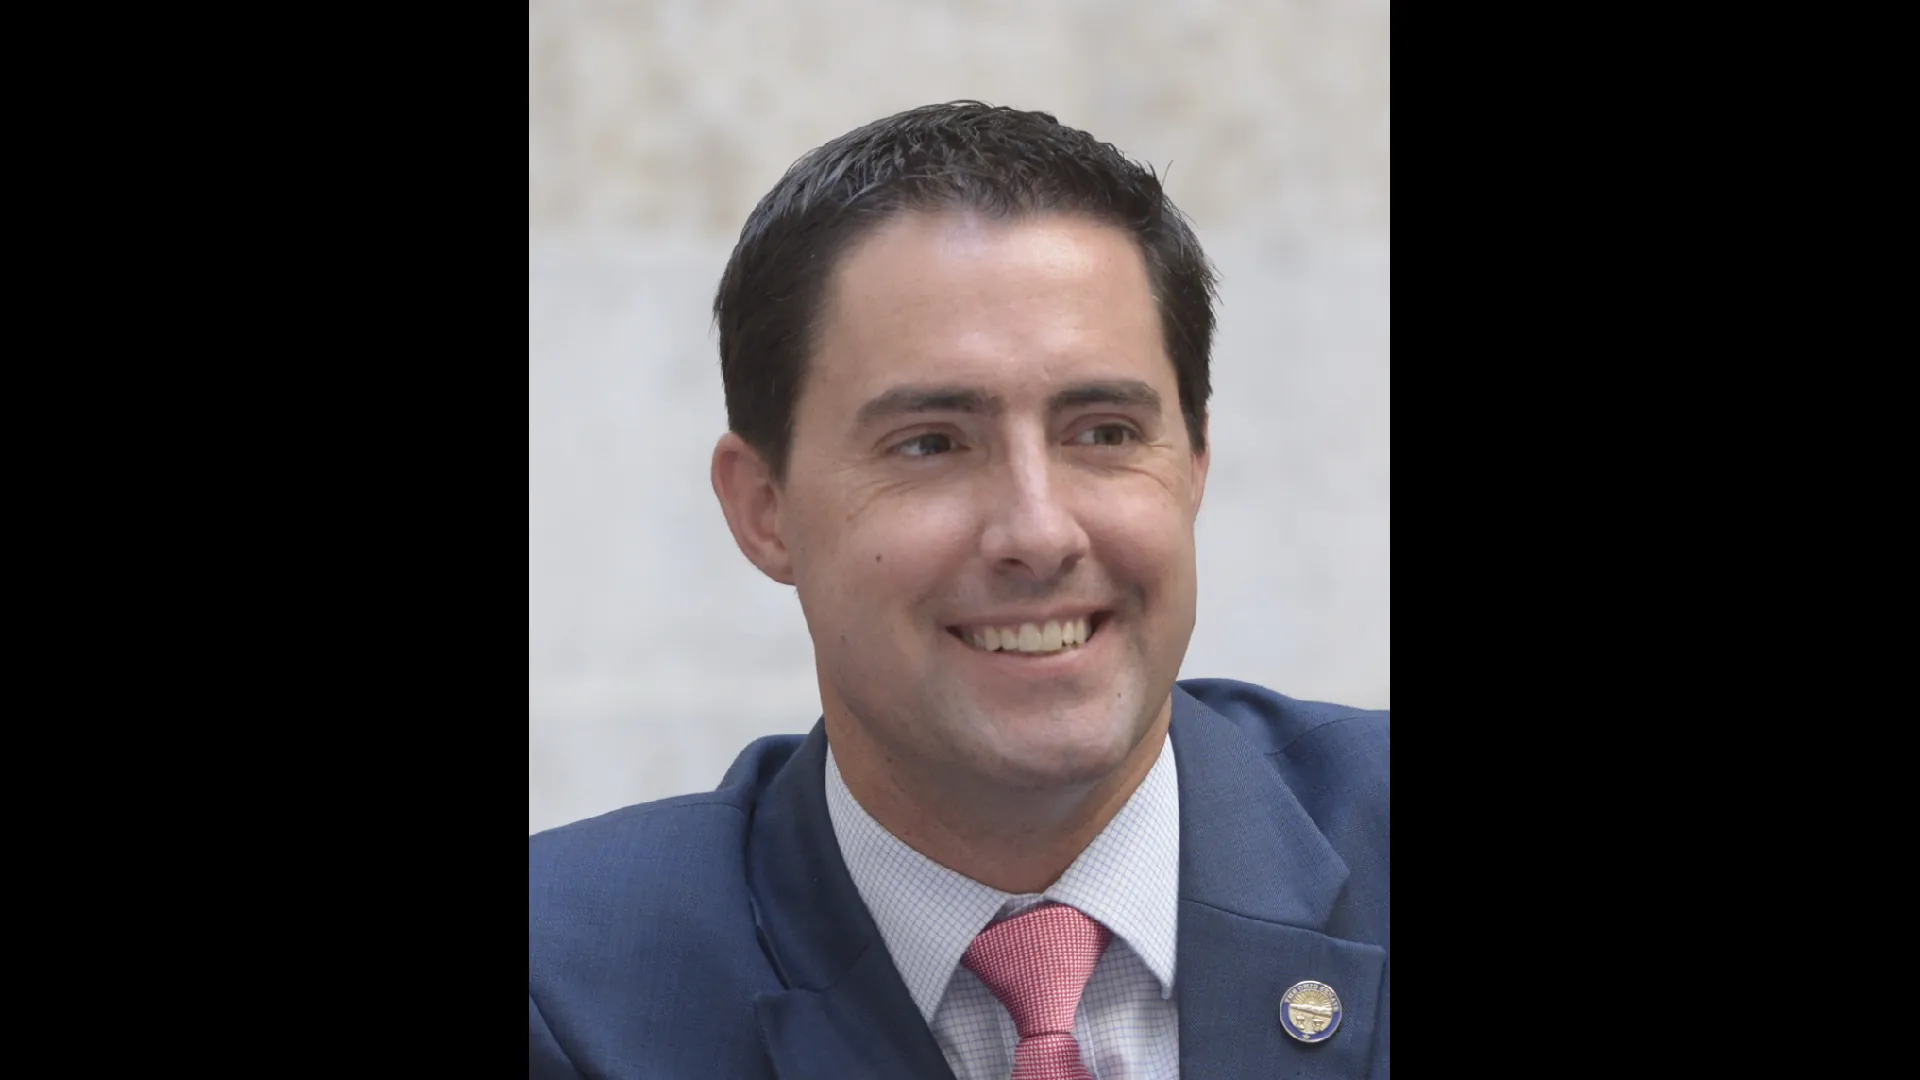 Ohio Secretary of State Frank LaRose Joins Crowded Republican Field for US Senate